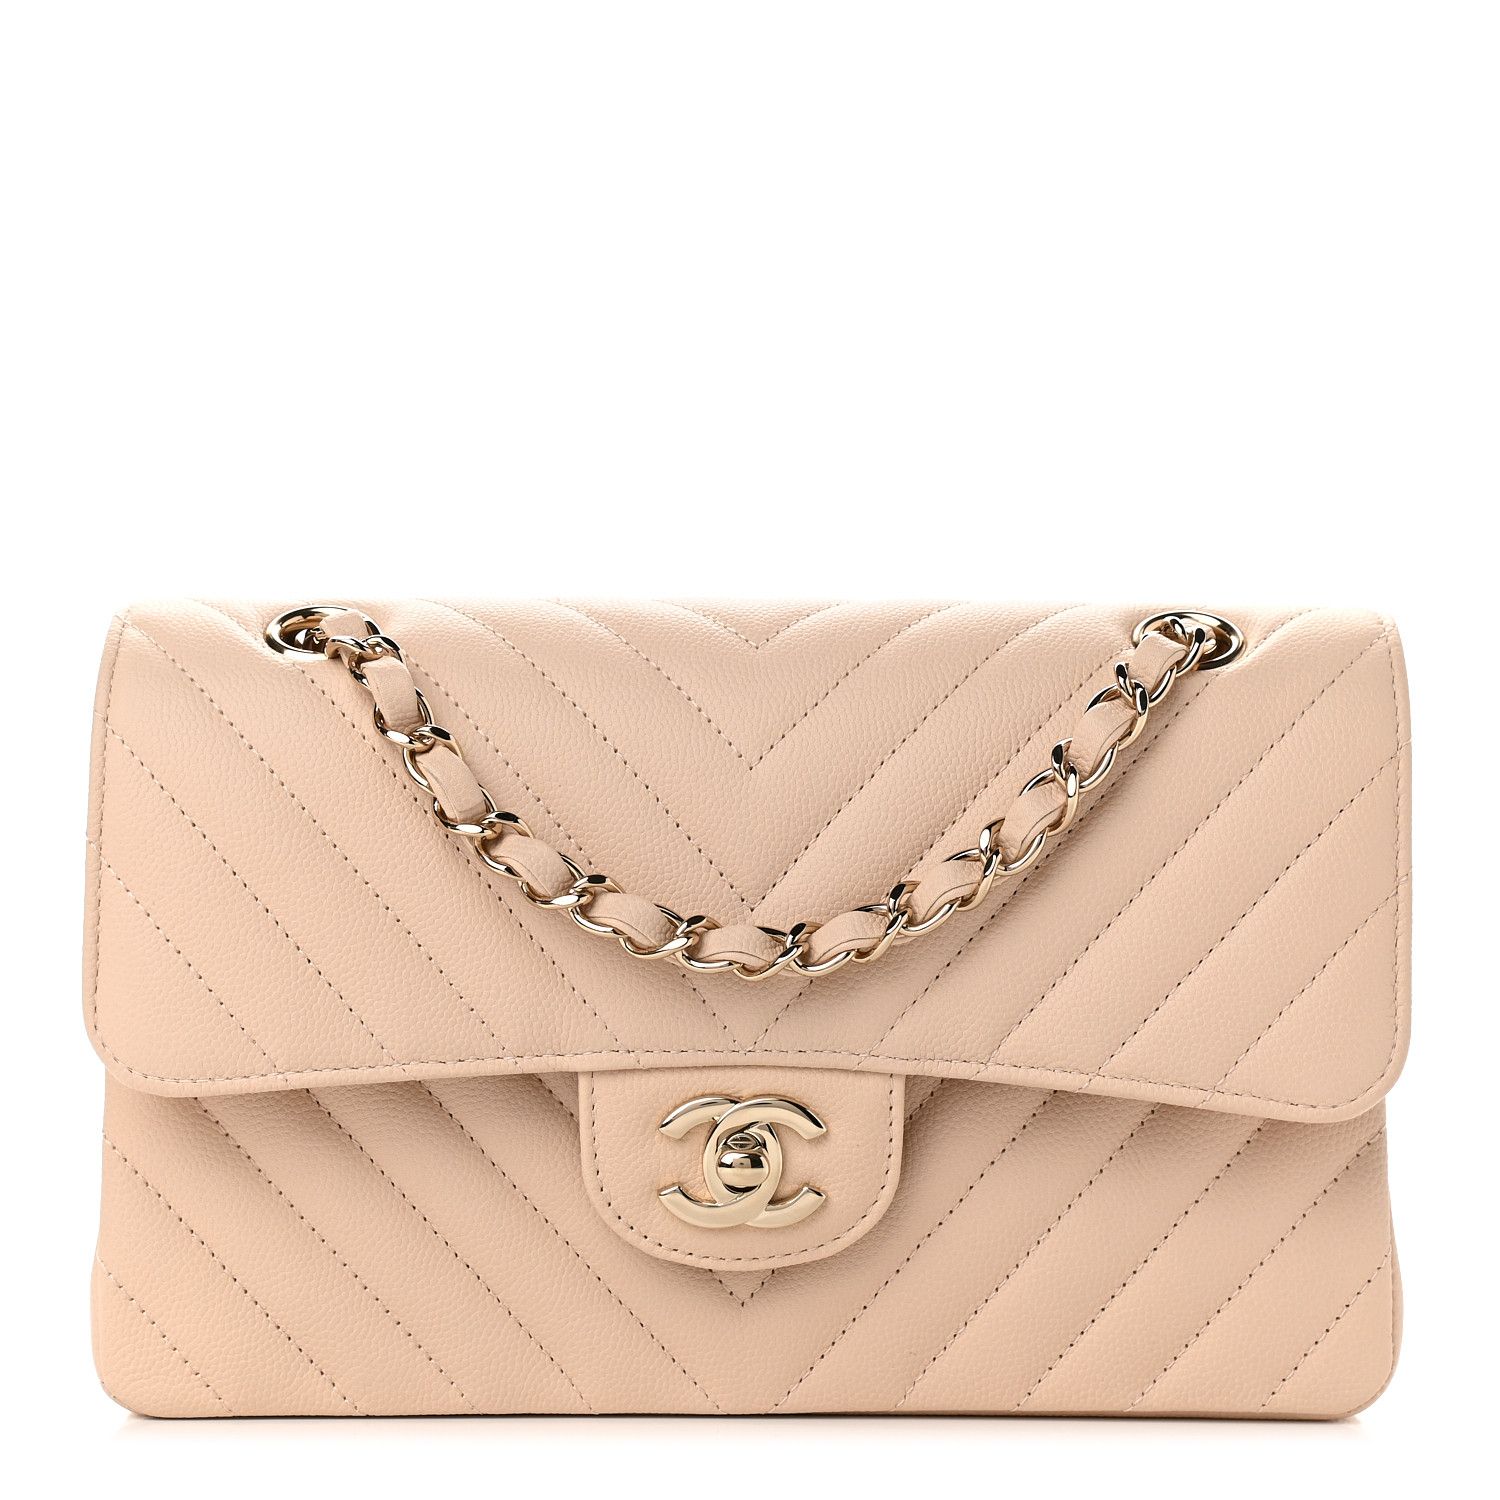 CHANEL Caviar Chevron Quilted Small Double Flap Beige | FASHIONPHILE | Fashionphile